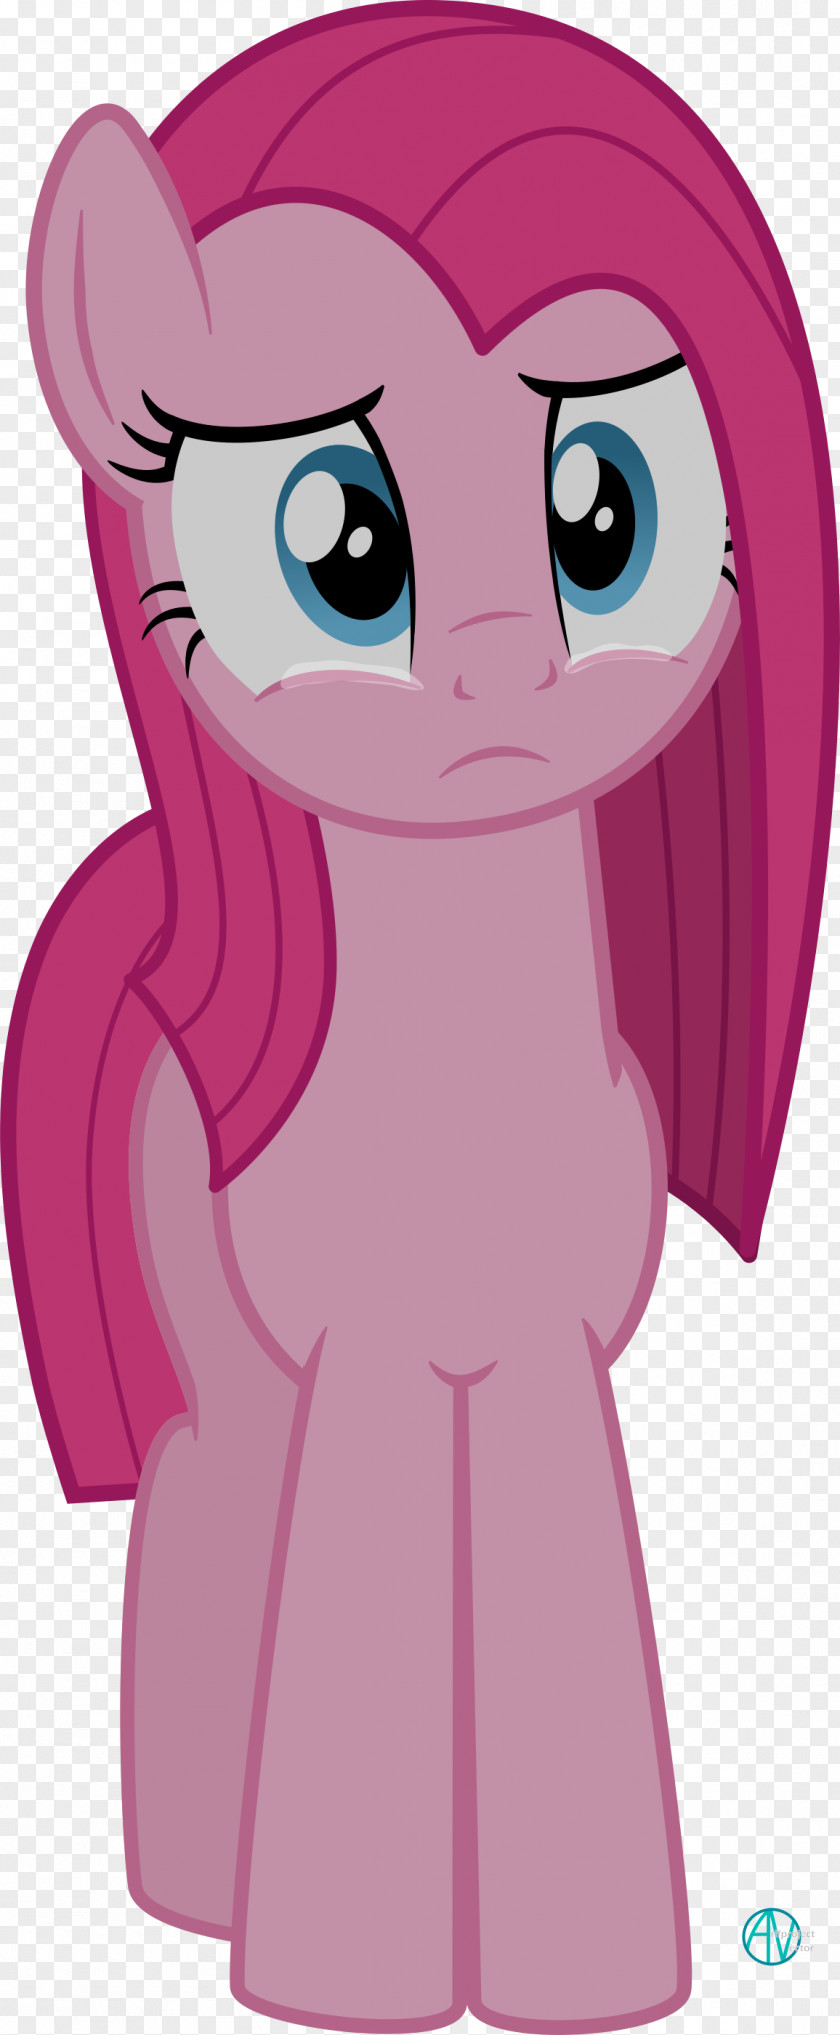 Crying Vector Pinkie Pie Pony Horse PNG